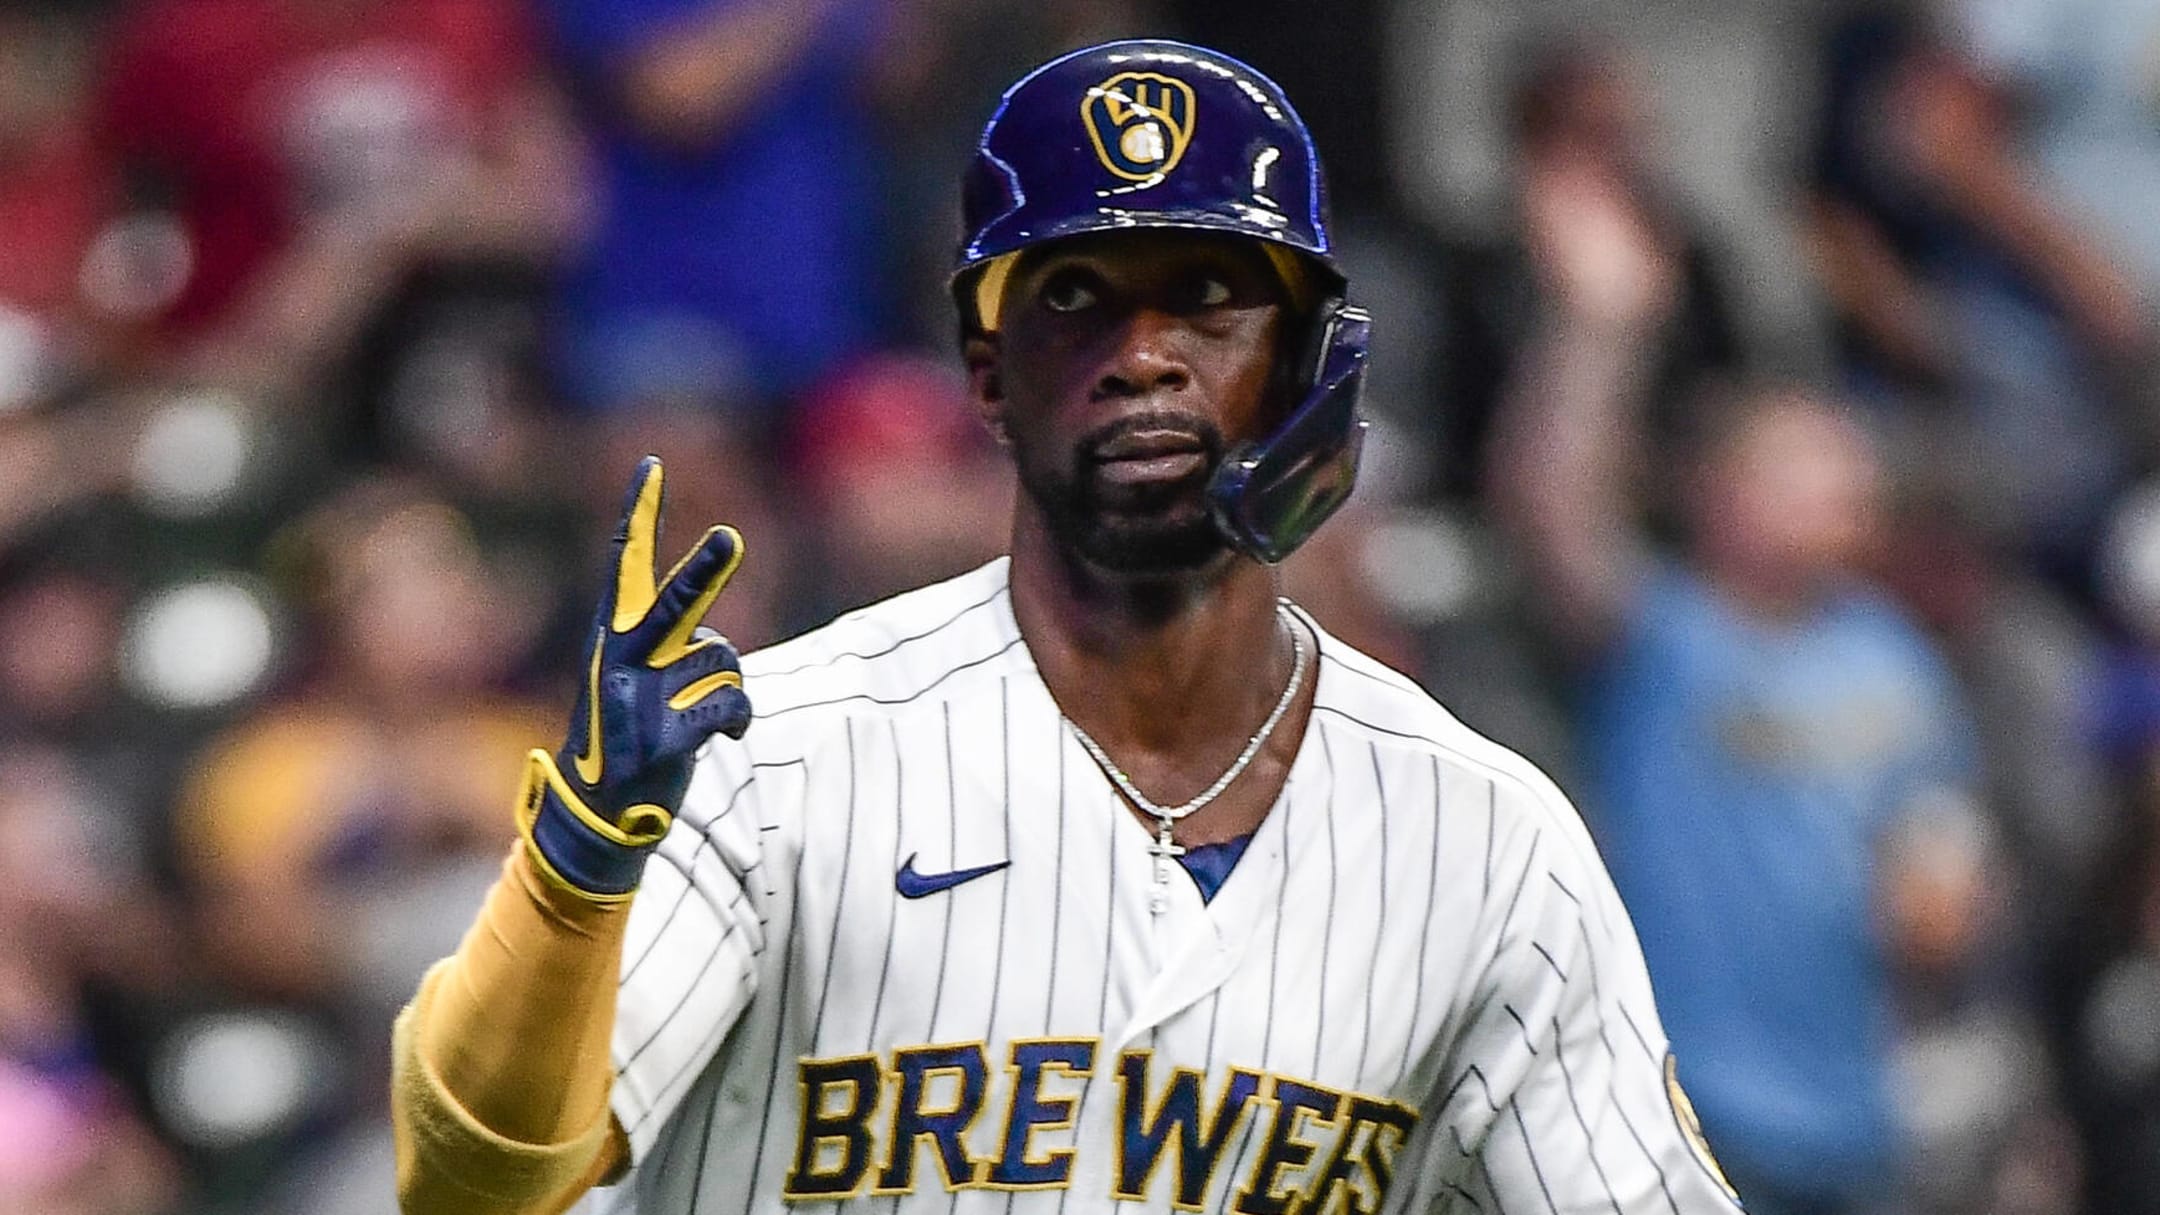 NL East team eyeing five-time All-Star Andrew McCutchen